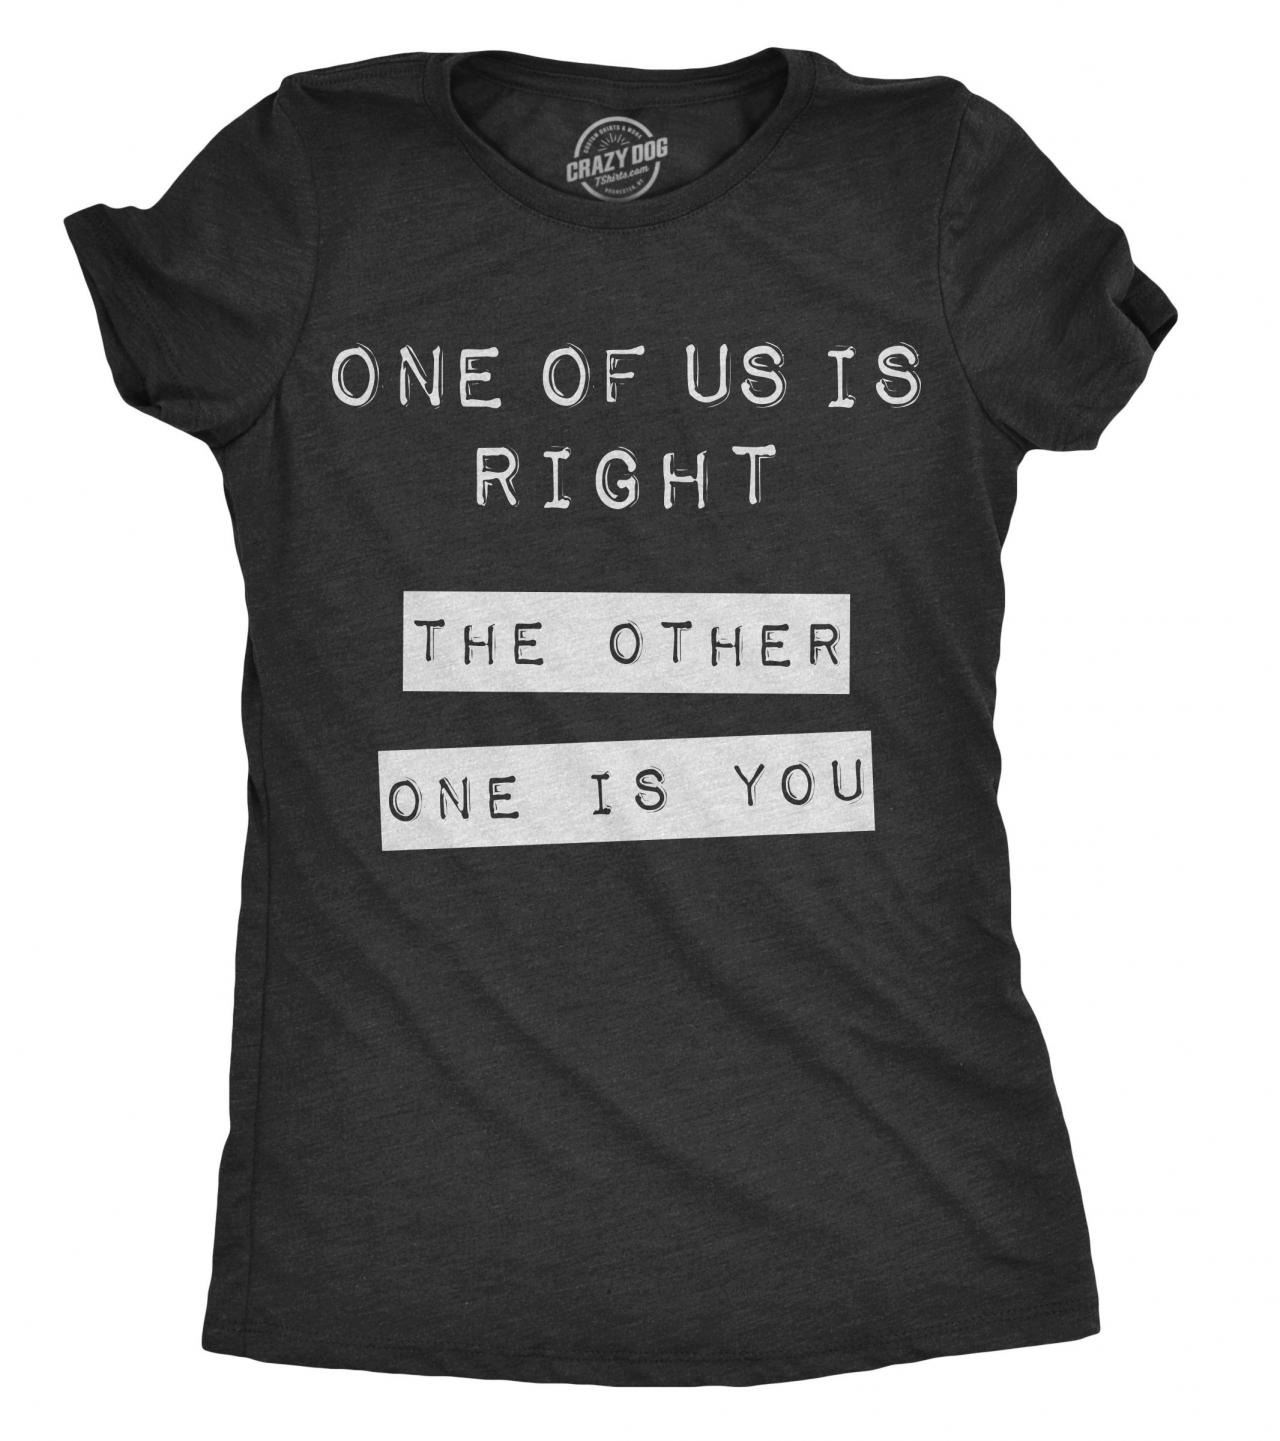 Always Right T Shirt, Sarcastic Shirts, Shirts With Funny Sayings, Offensive Shirt for Women, One of Us is right The Other One is You